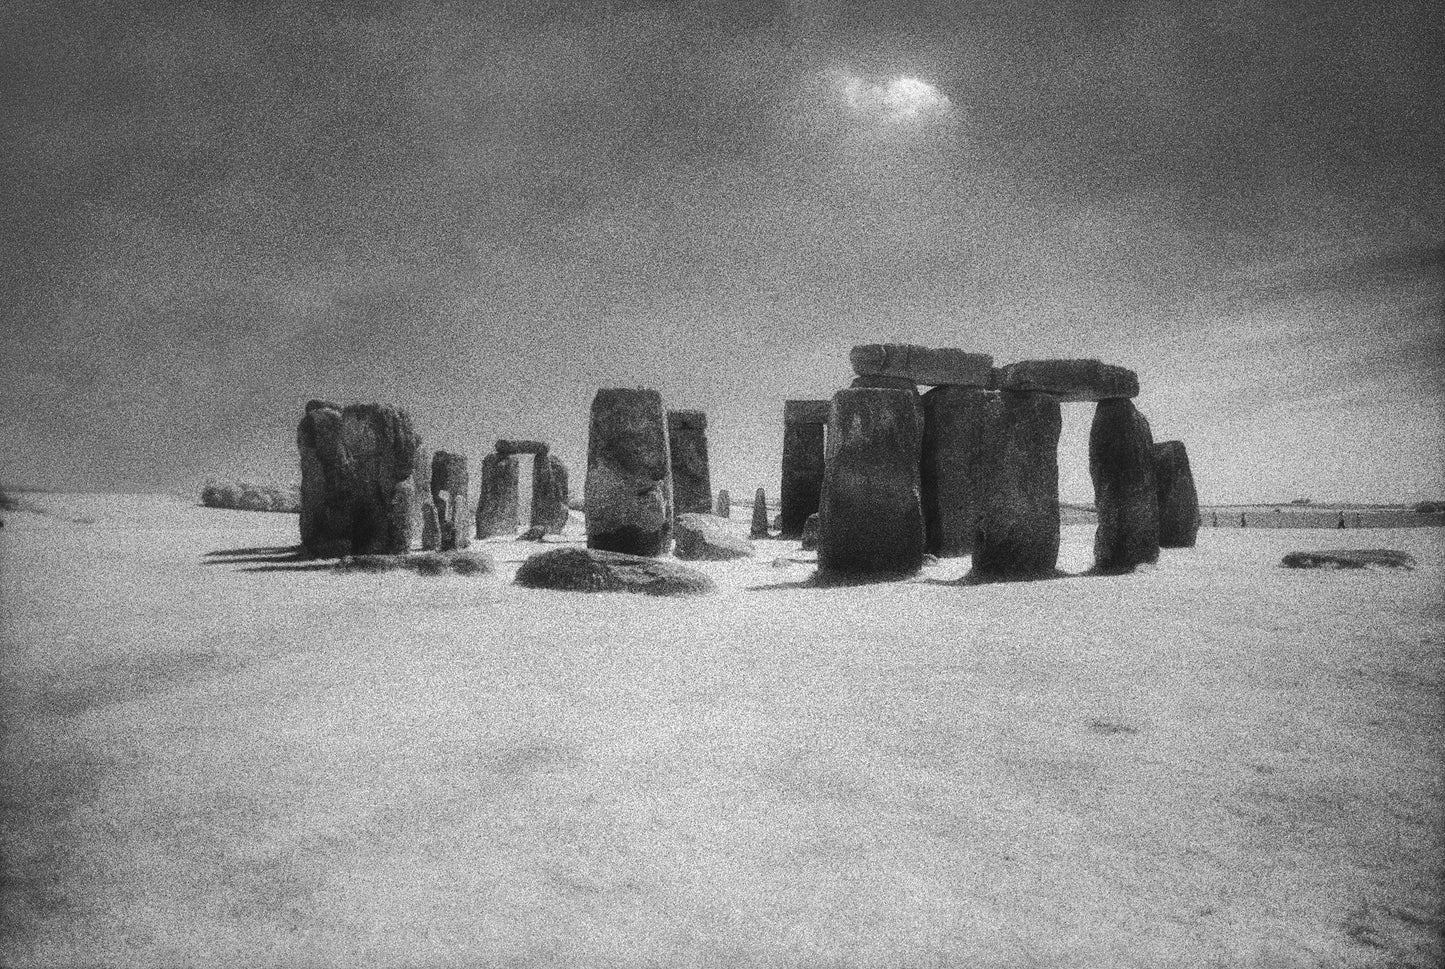 Stonehenge, this is an 8x10" black and white photograph that is printed on archival digital paper. The print is signed, dated and numbered on verso. 